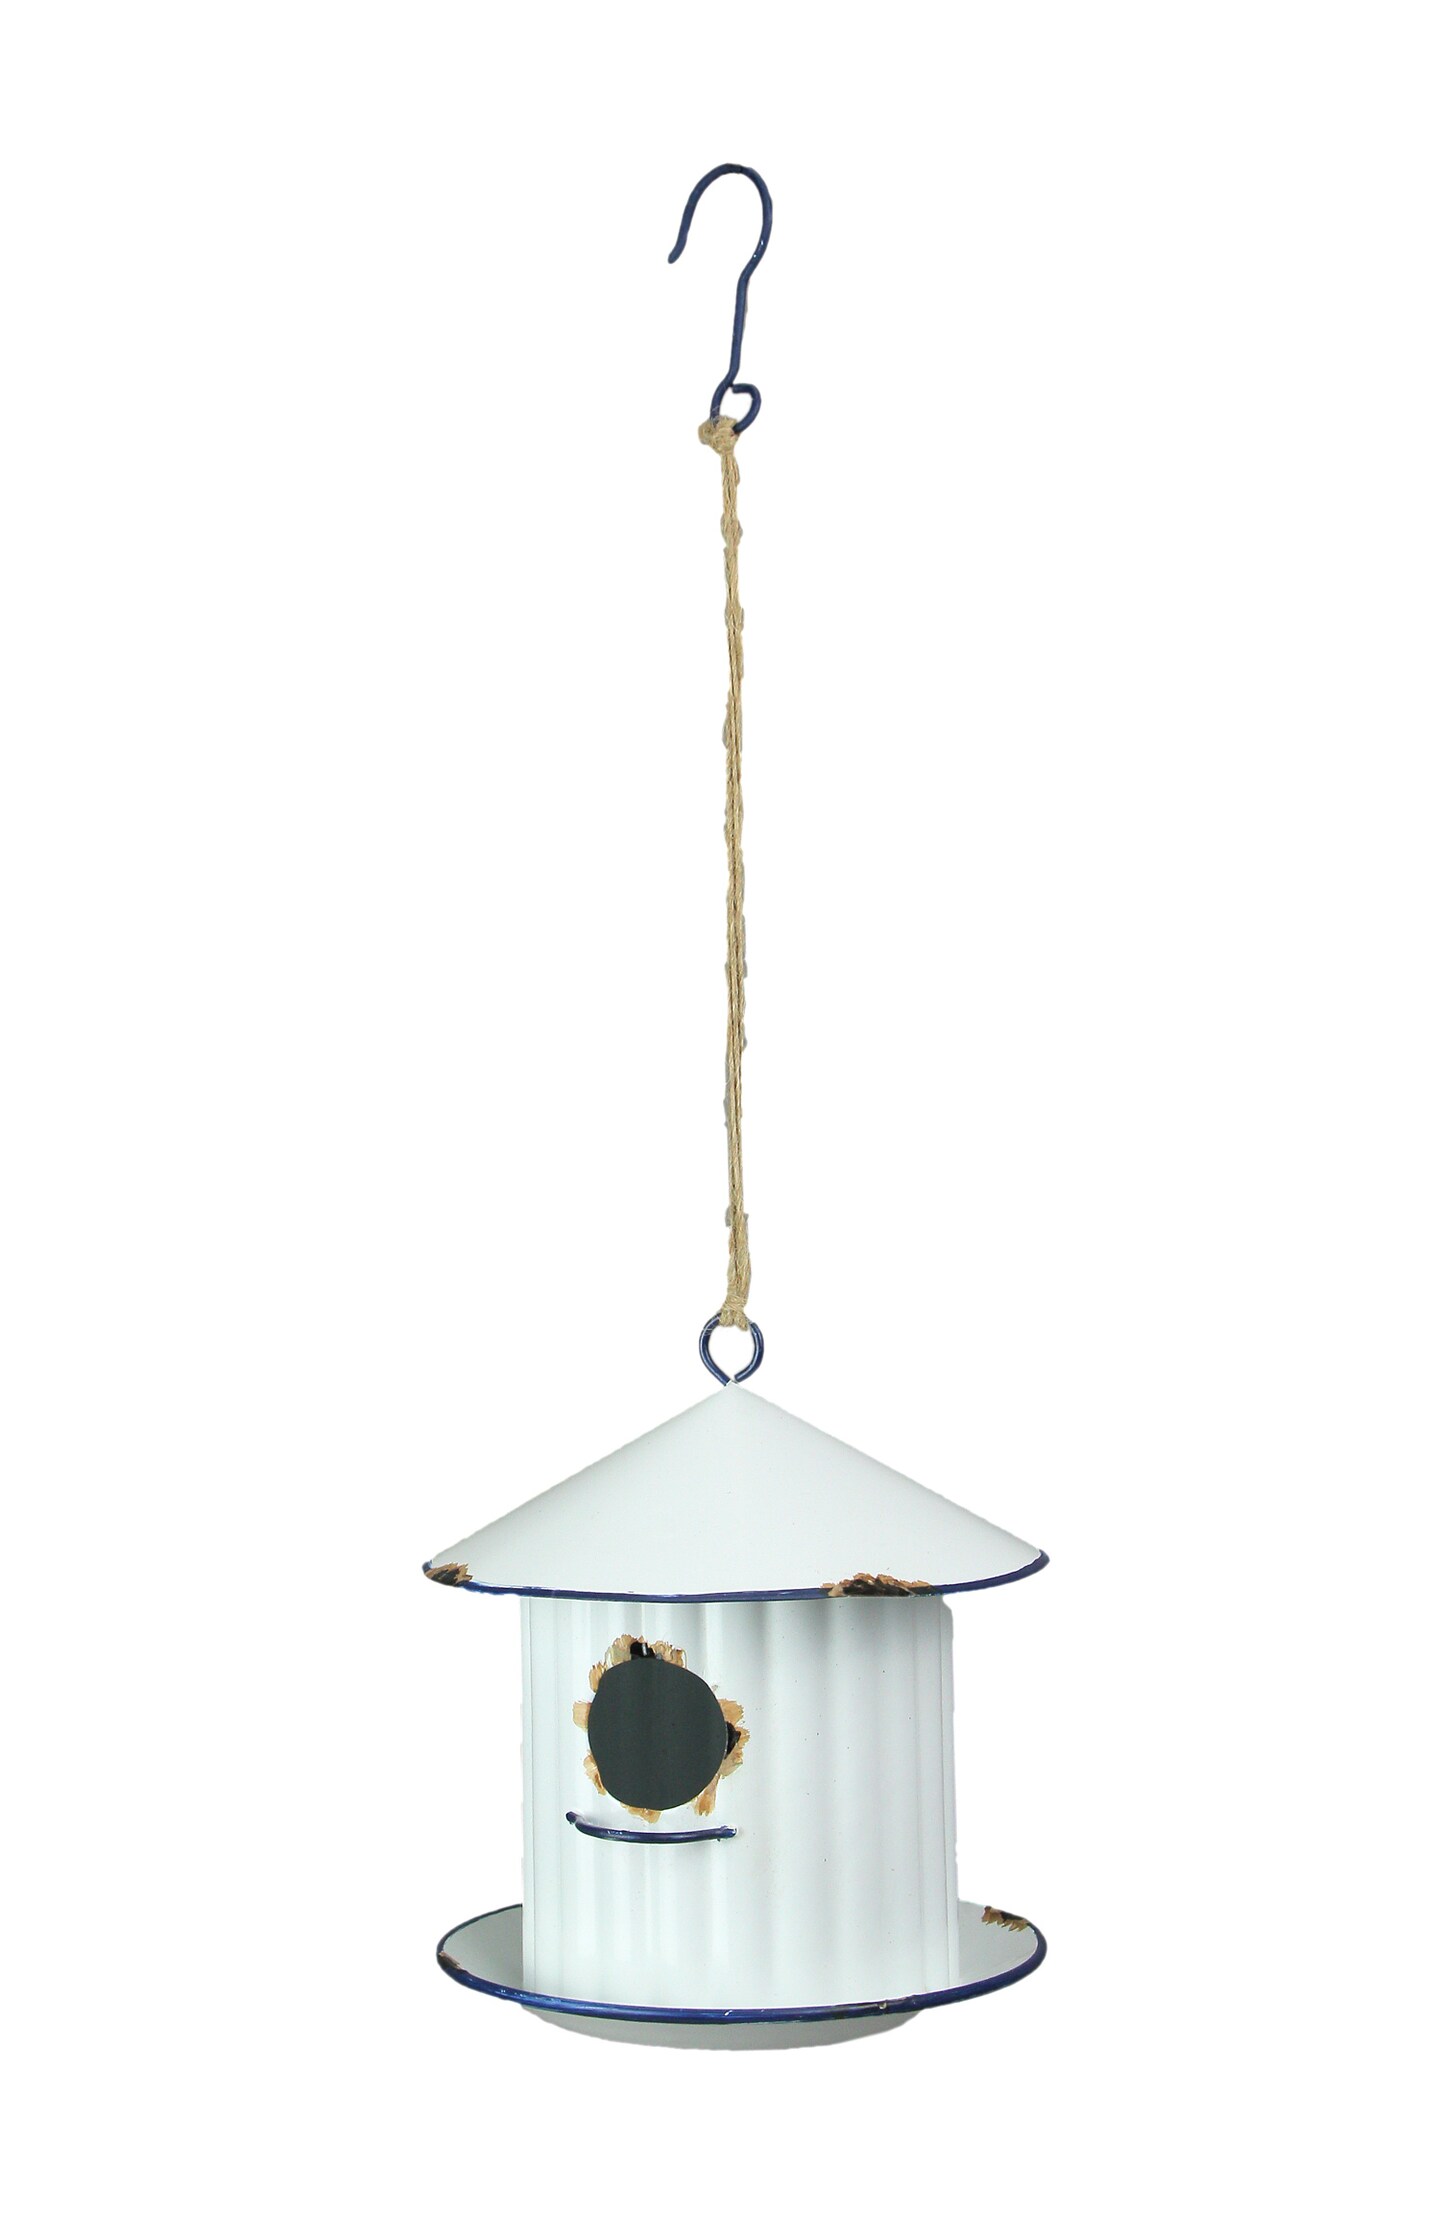 Weathered White Silo Design Hanging Metal Birdhouse With Blue Trim